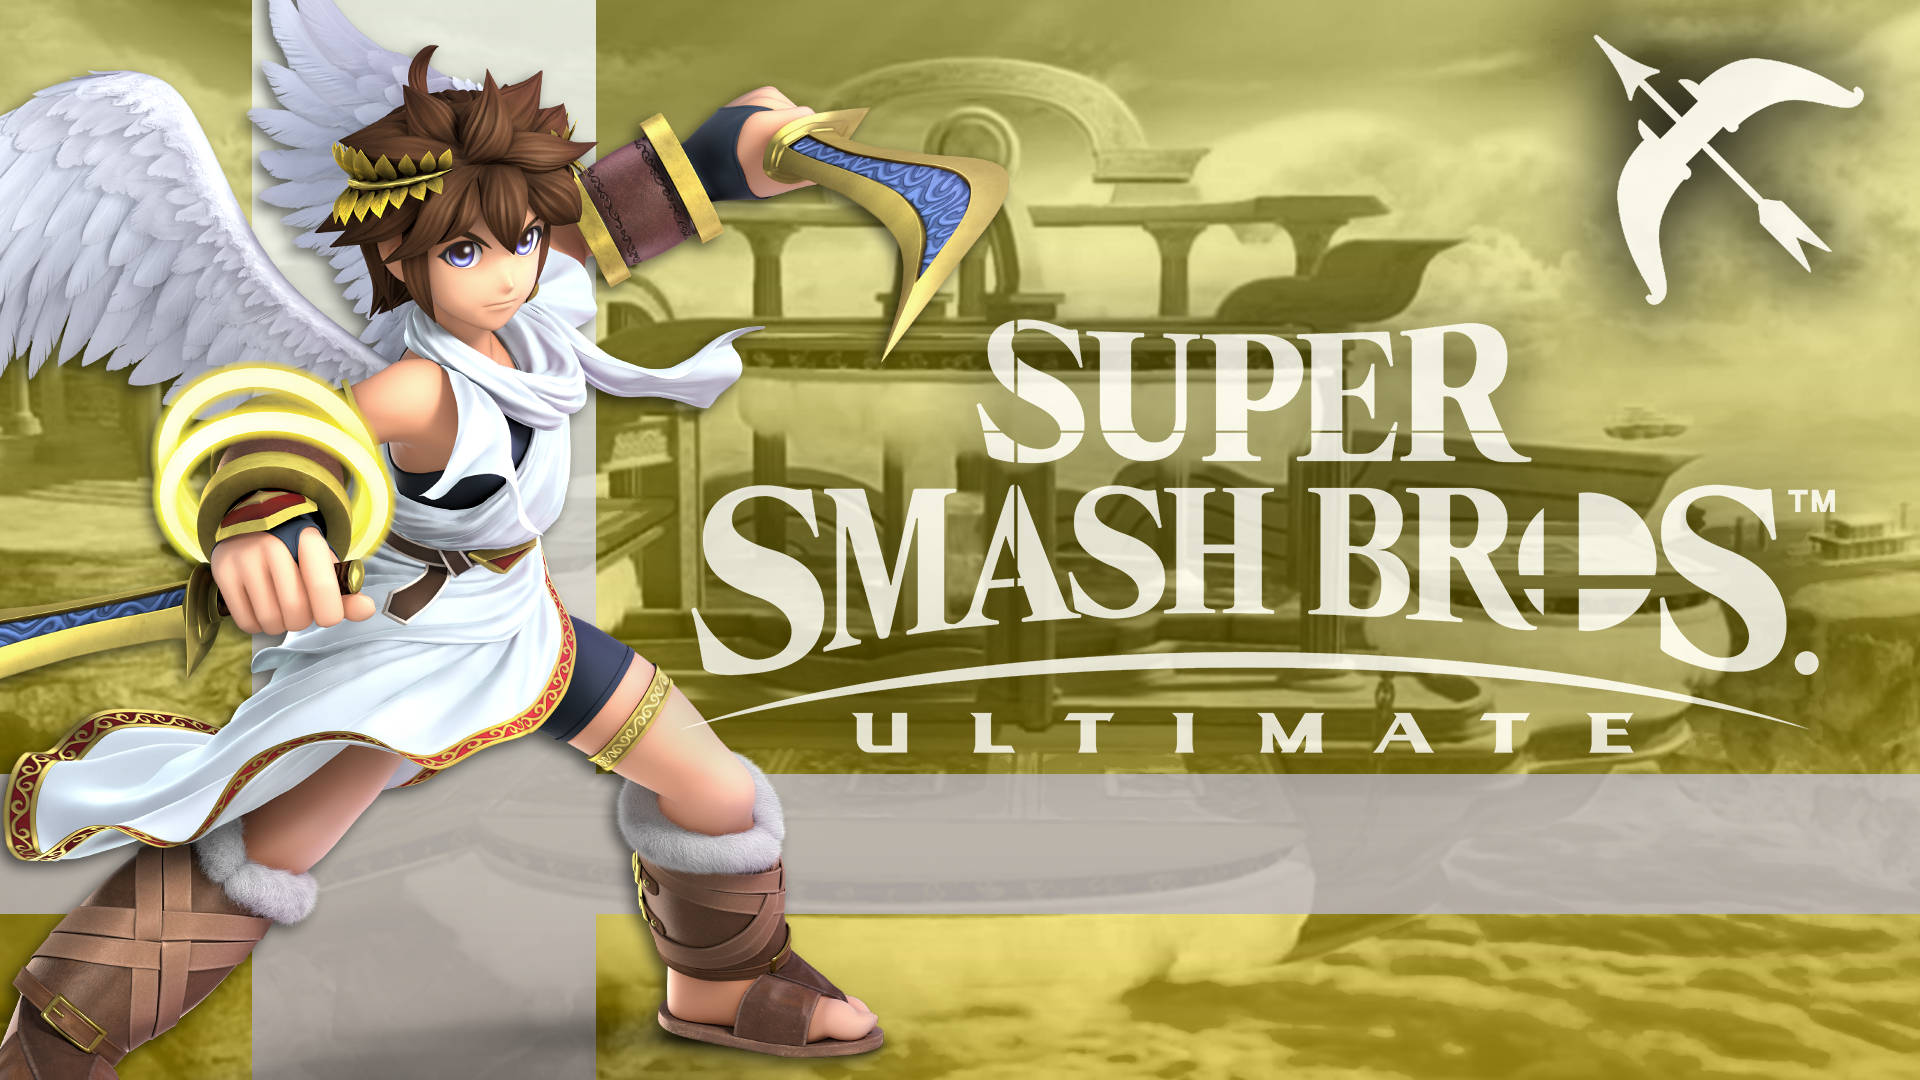 The Smash brothers are in for a brawl on the stage of the iconic Palutena's Temple Wallpaper